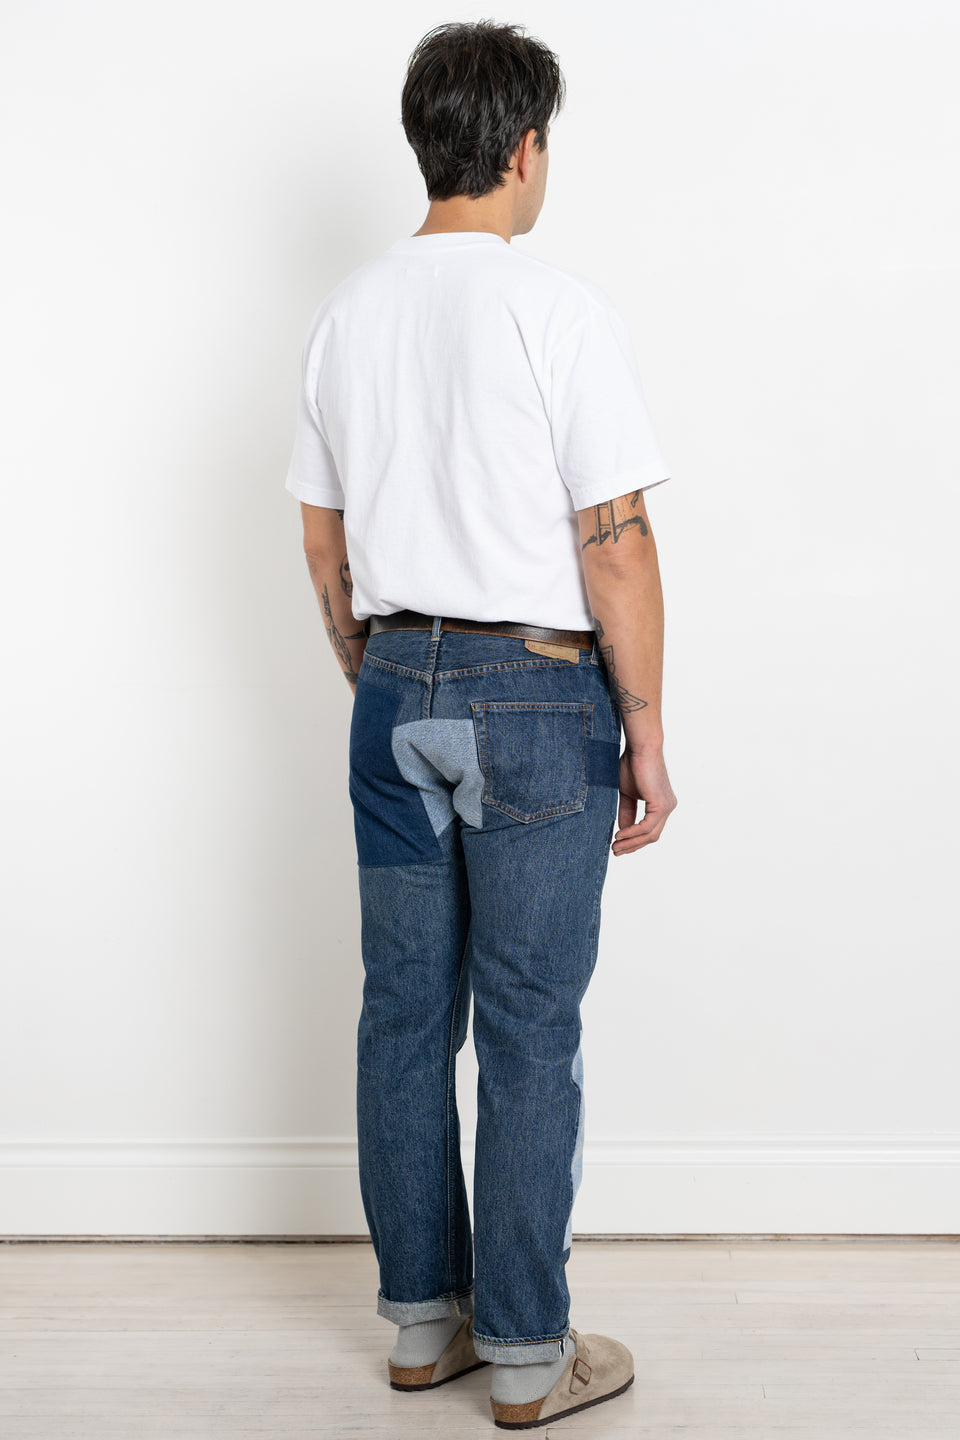 orSlow Japan 23AW FW23 Men's Collection 105 Patch Work Remake Jeans Calculus Victoria BC Canada